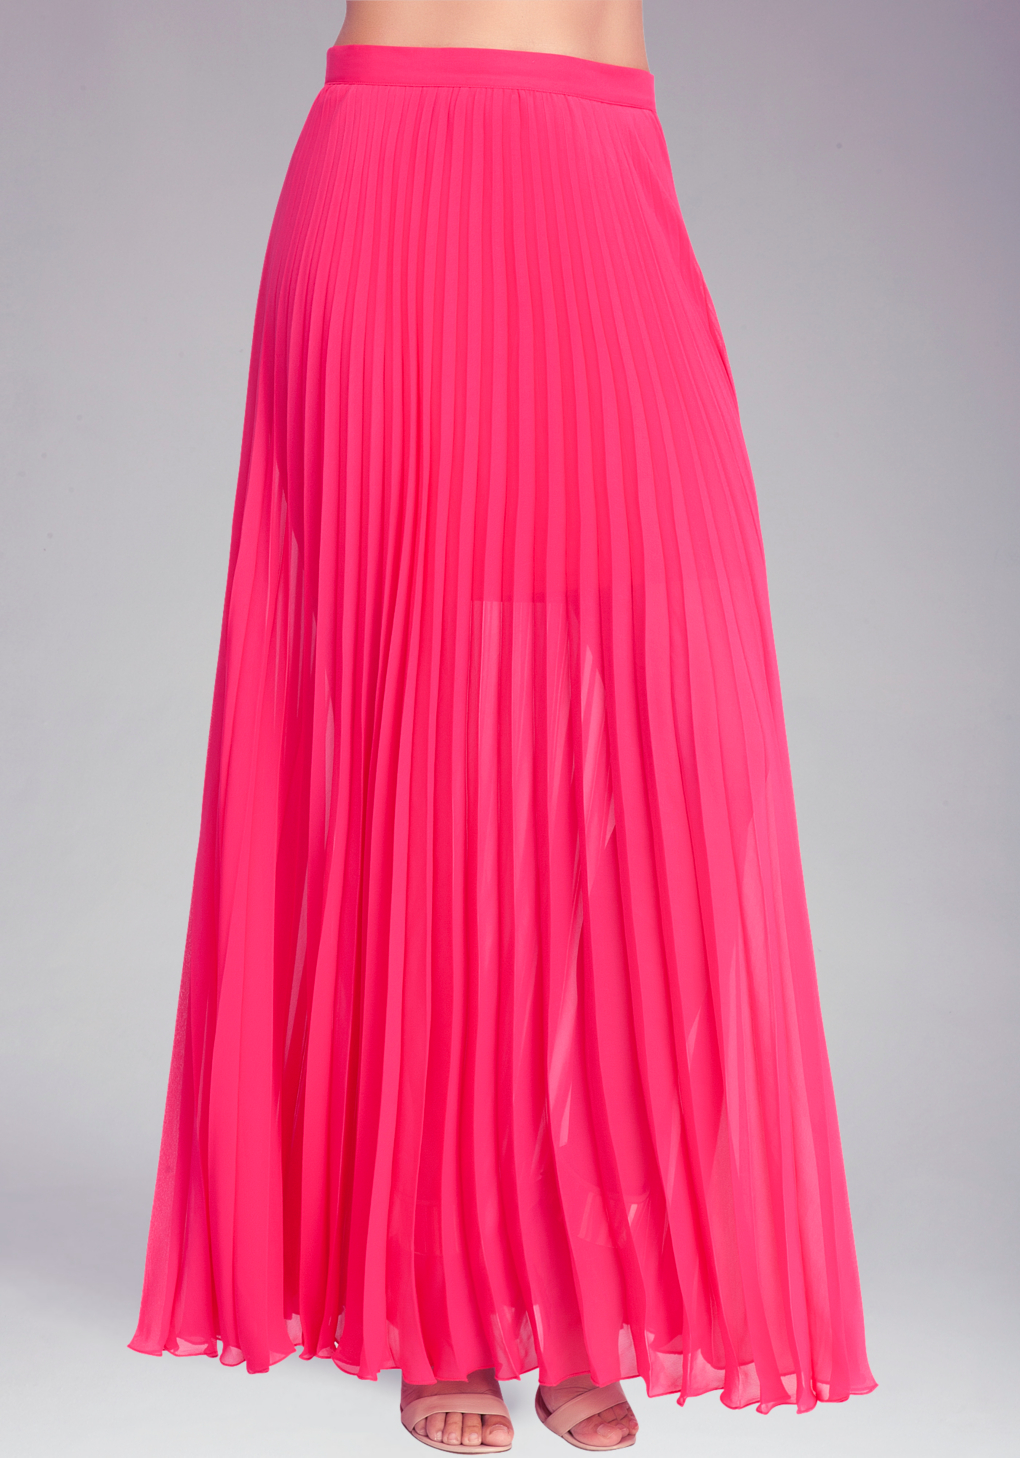 Bebe Pleated Long Skirt in Pink (rose) Lyst